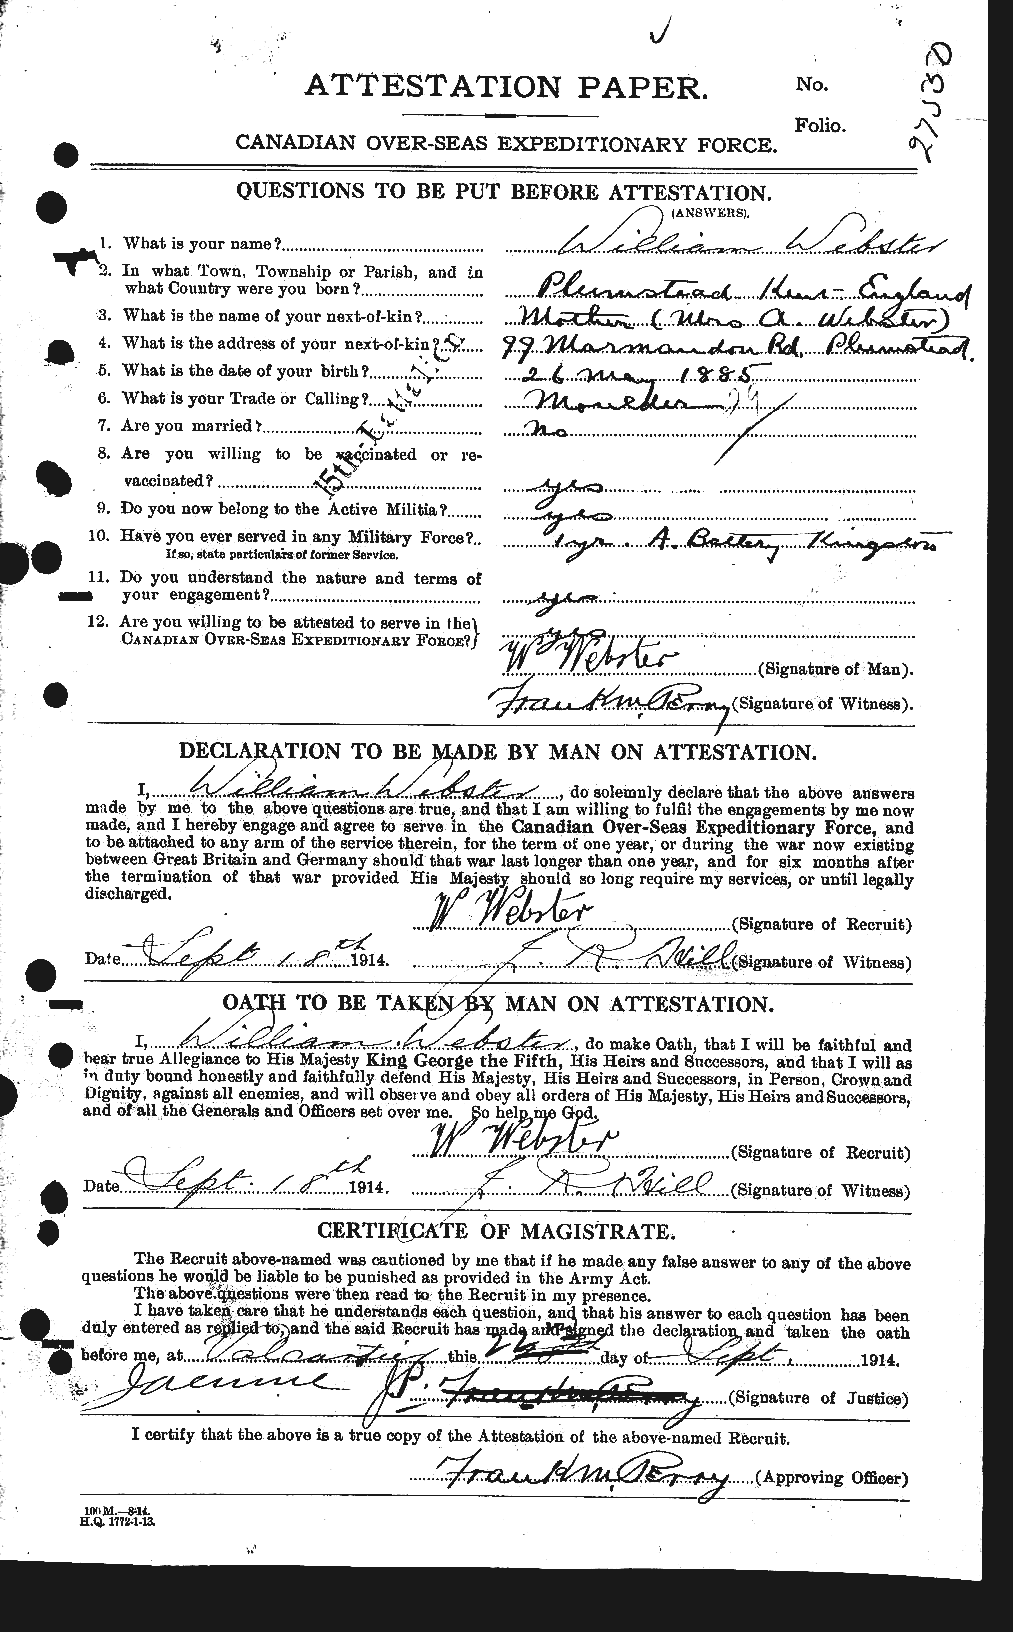 Personnel Records of the First World War - CEF 662008a